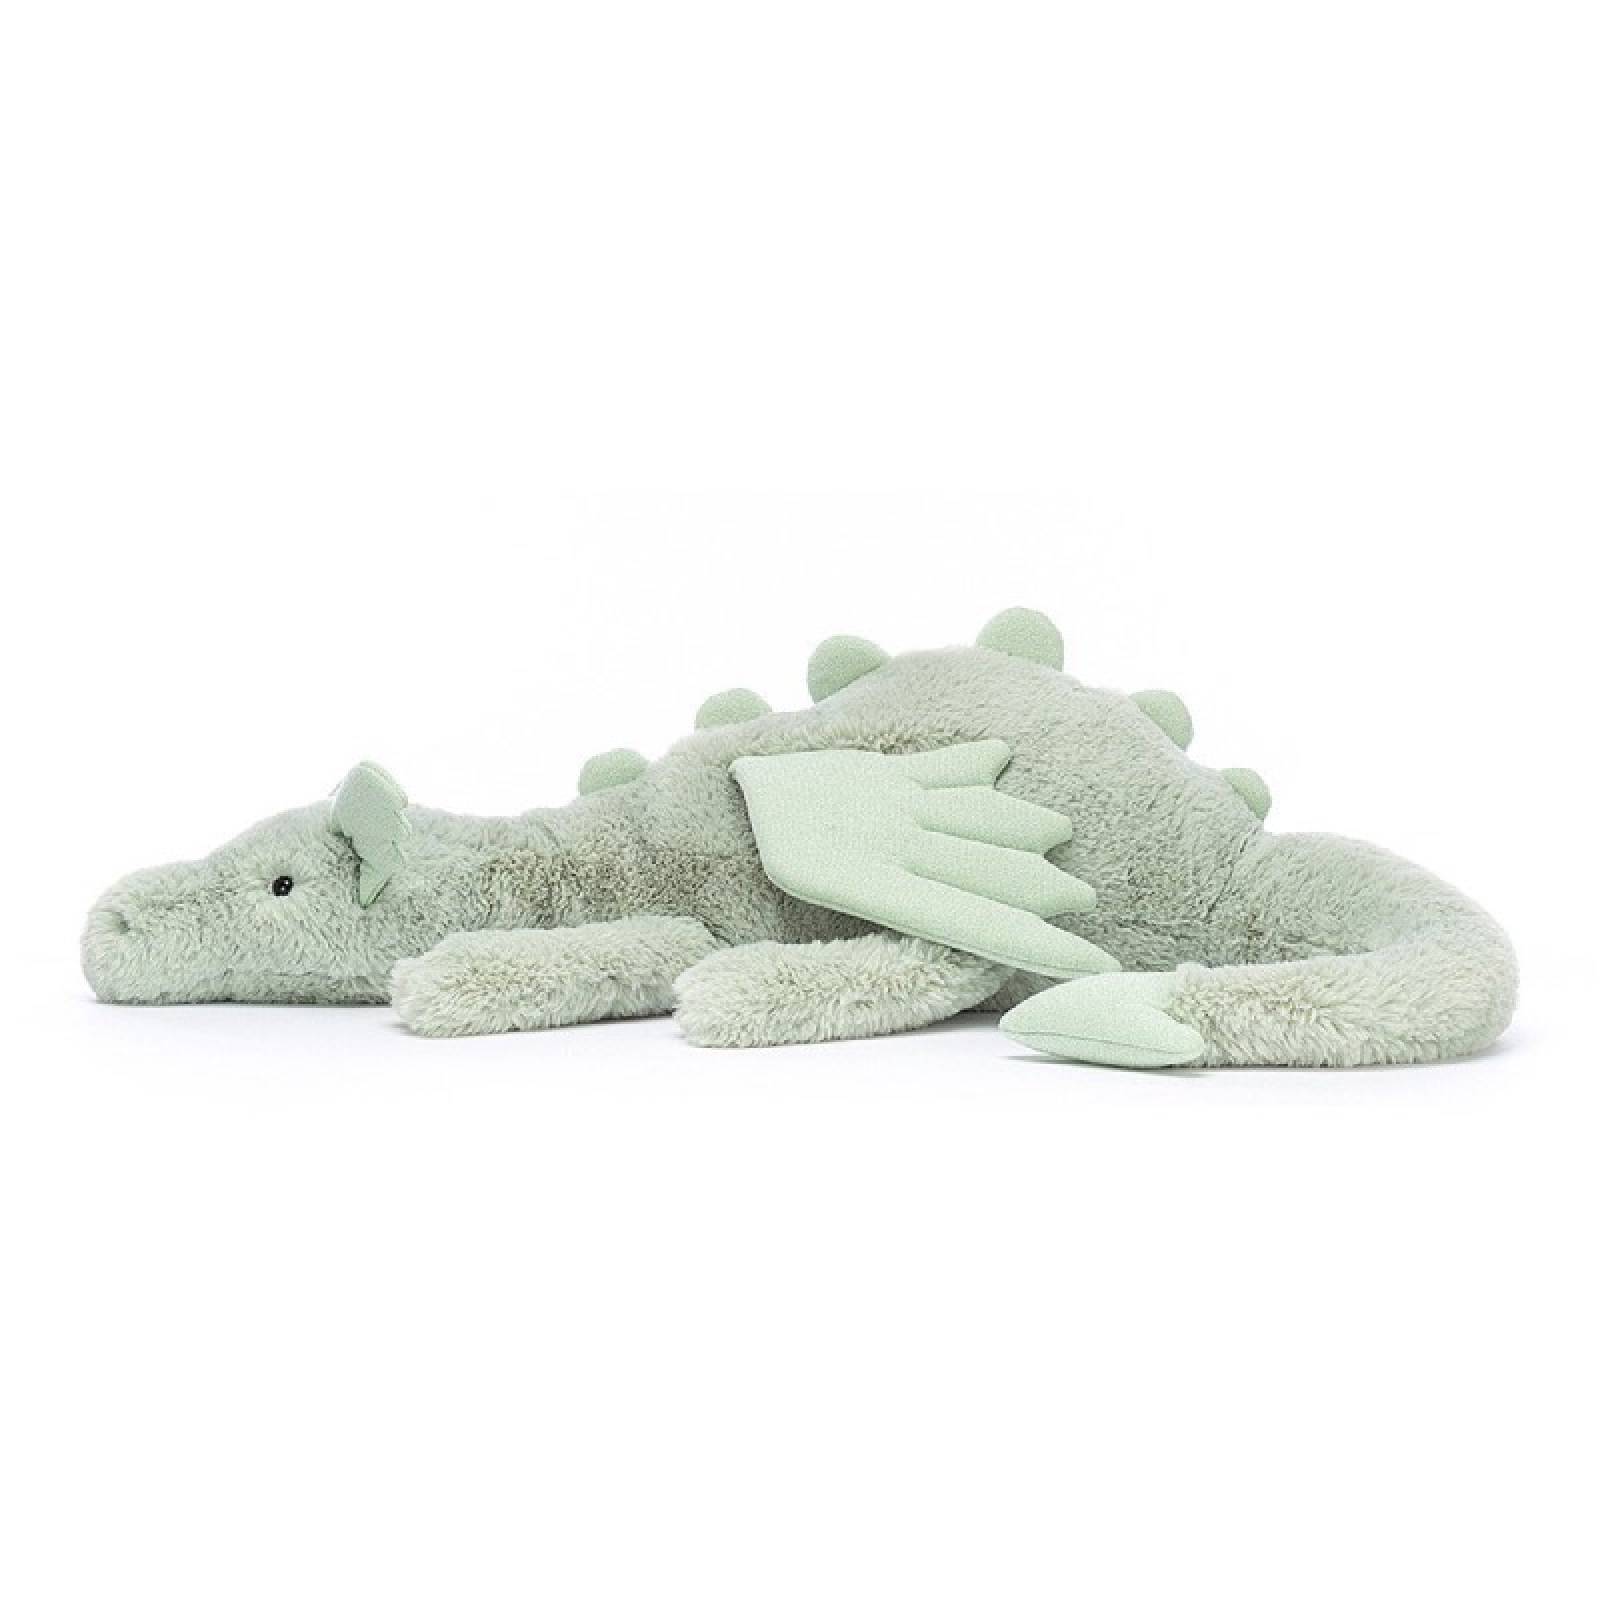 Huge Sage Dragon Soft Toy By Jellycat thumbnails